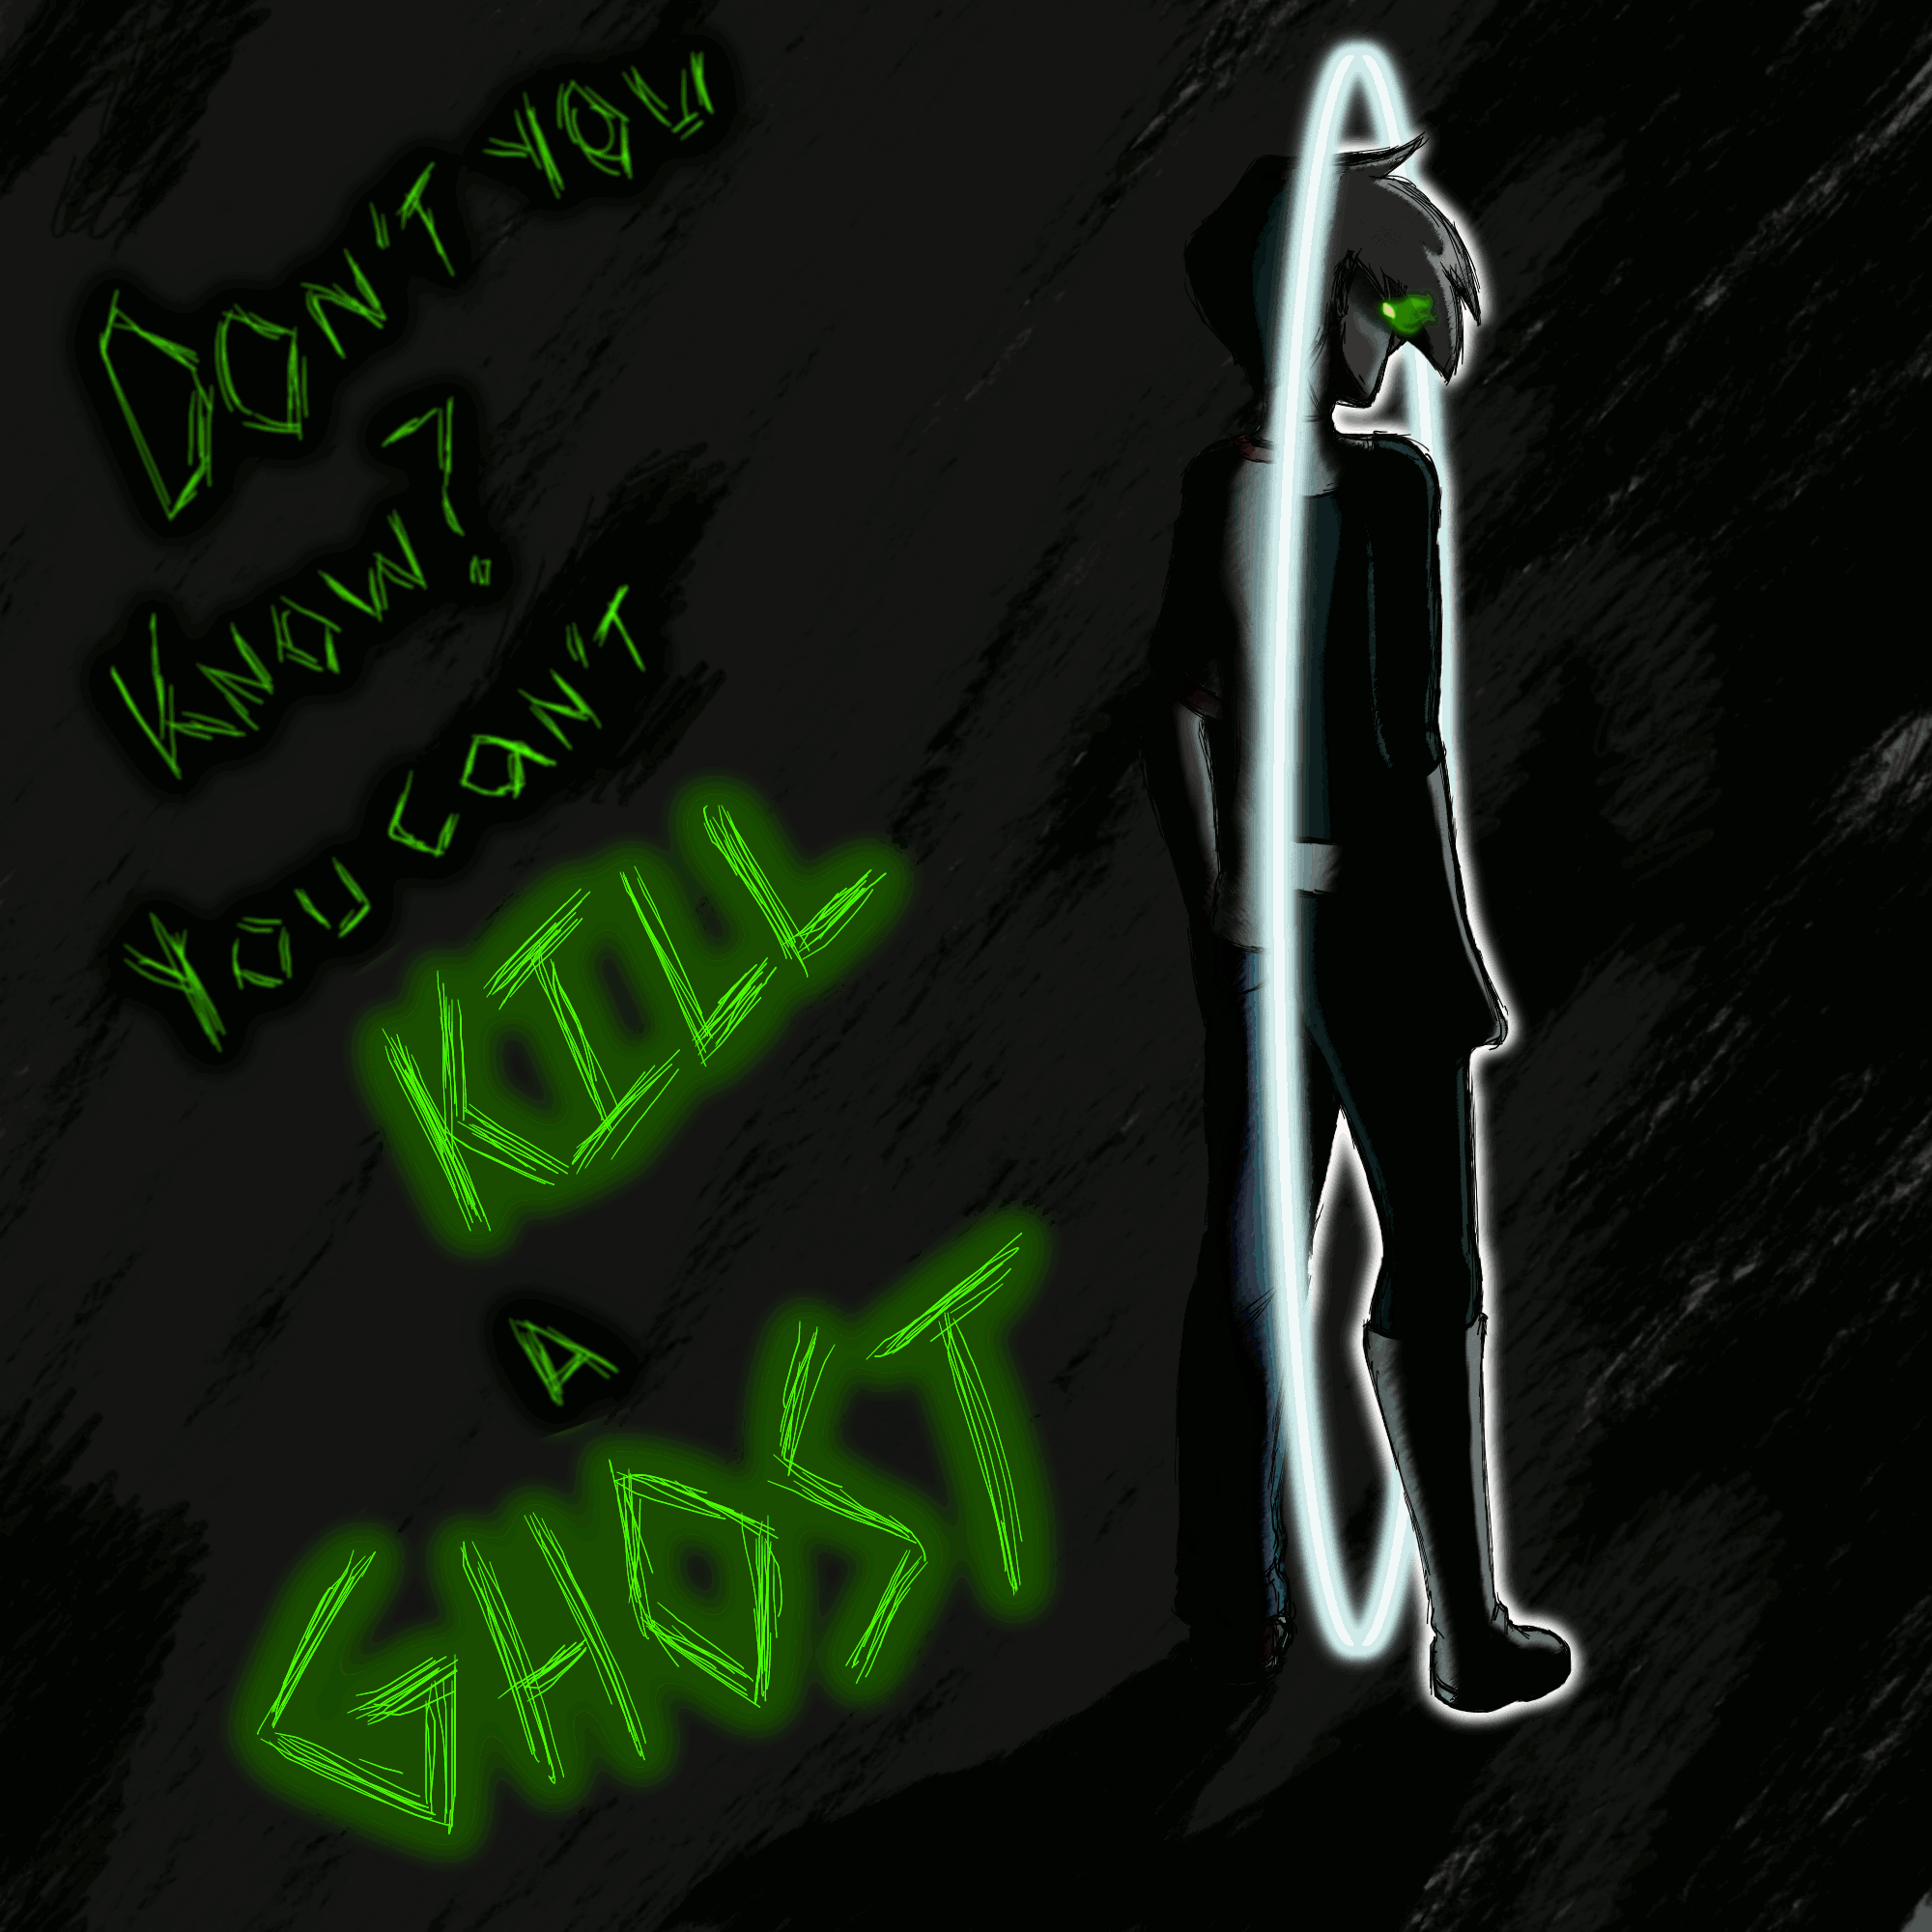 Kill The Ghost